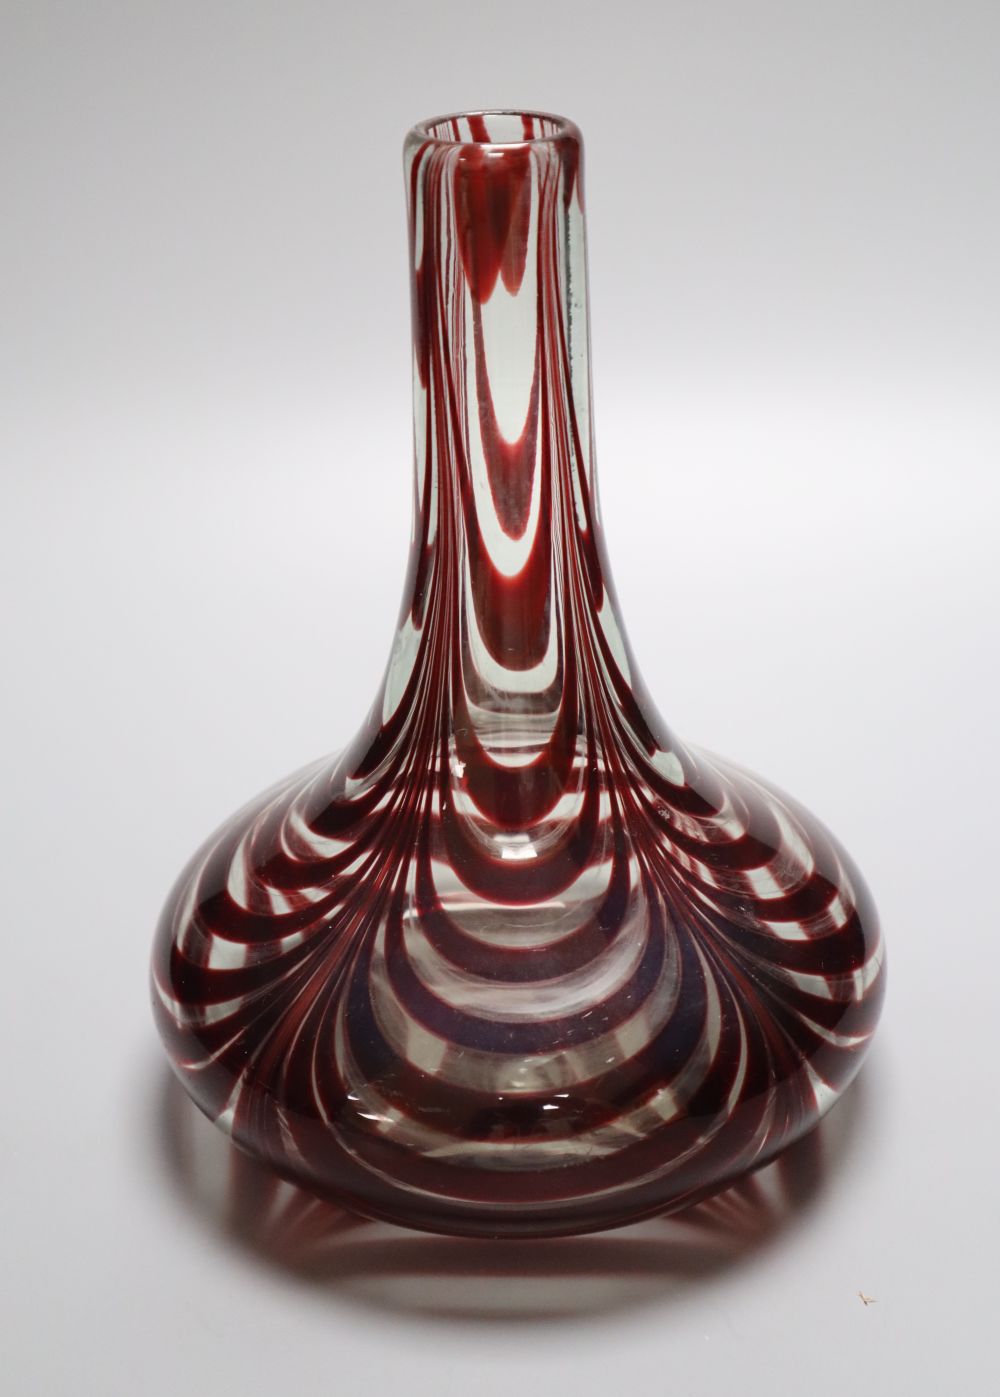 A Victorian red trail glass carafe with bold concentric looped decoration, 20cm highCONDITION: